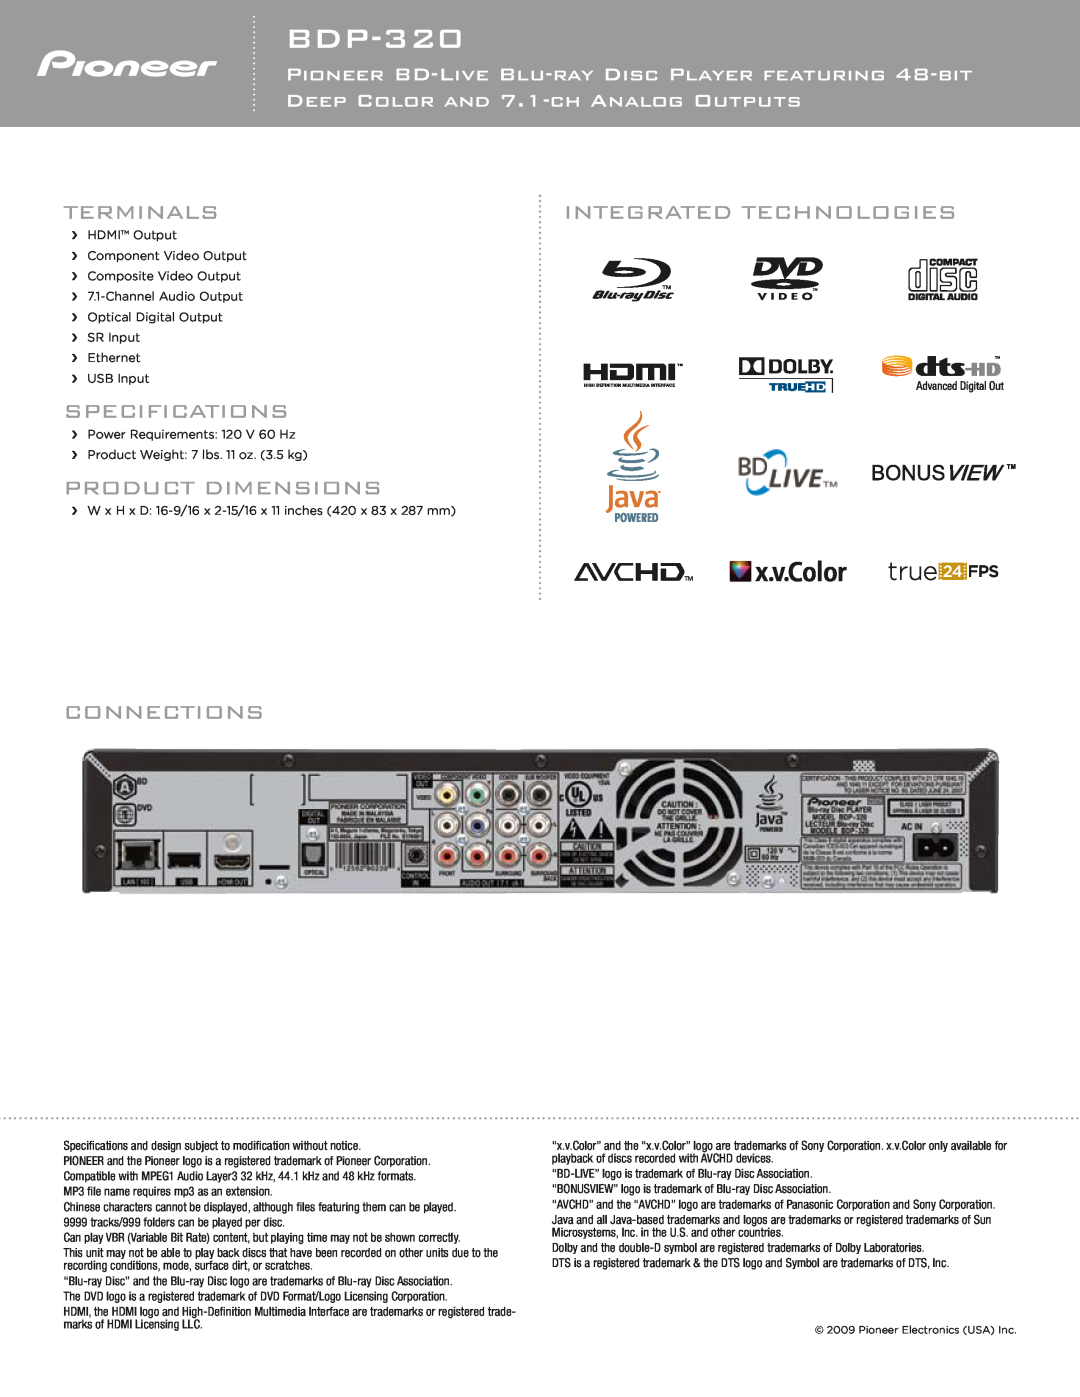 Pioneer BDP-320 manual Terminals, Integrated Technologies, Specifications, Product Dimensions, Connections 